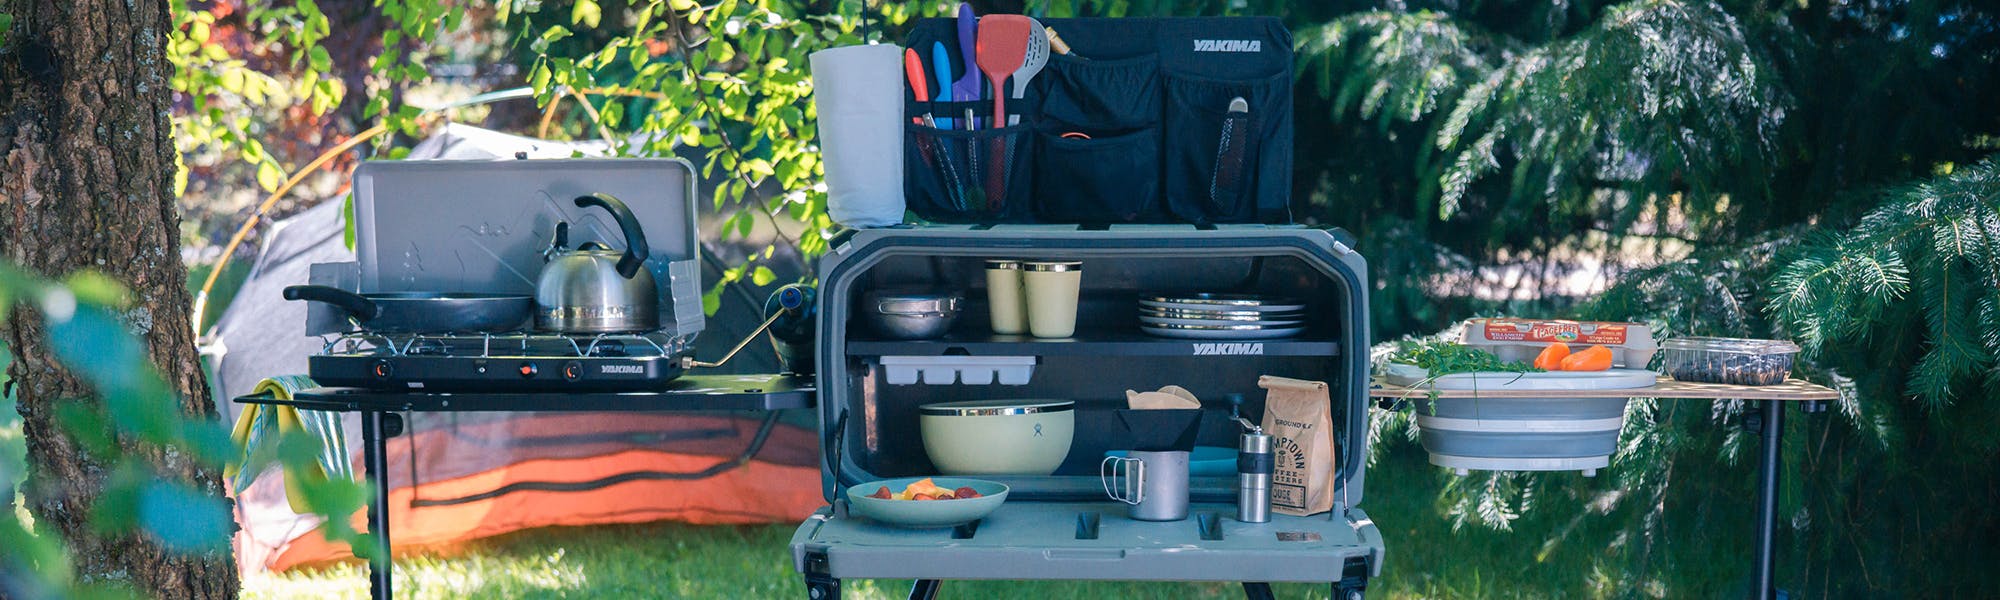 Kitchen Camping Products